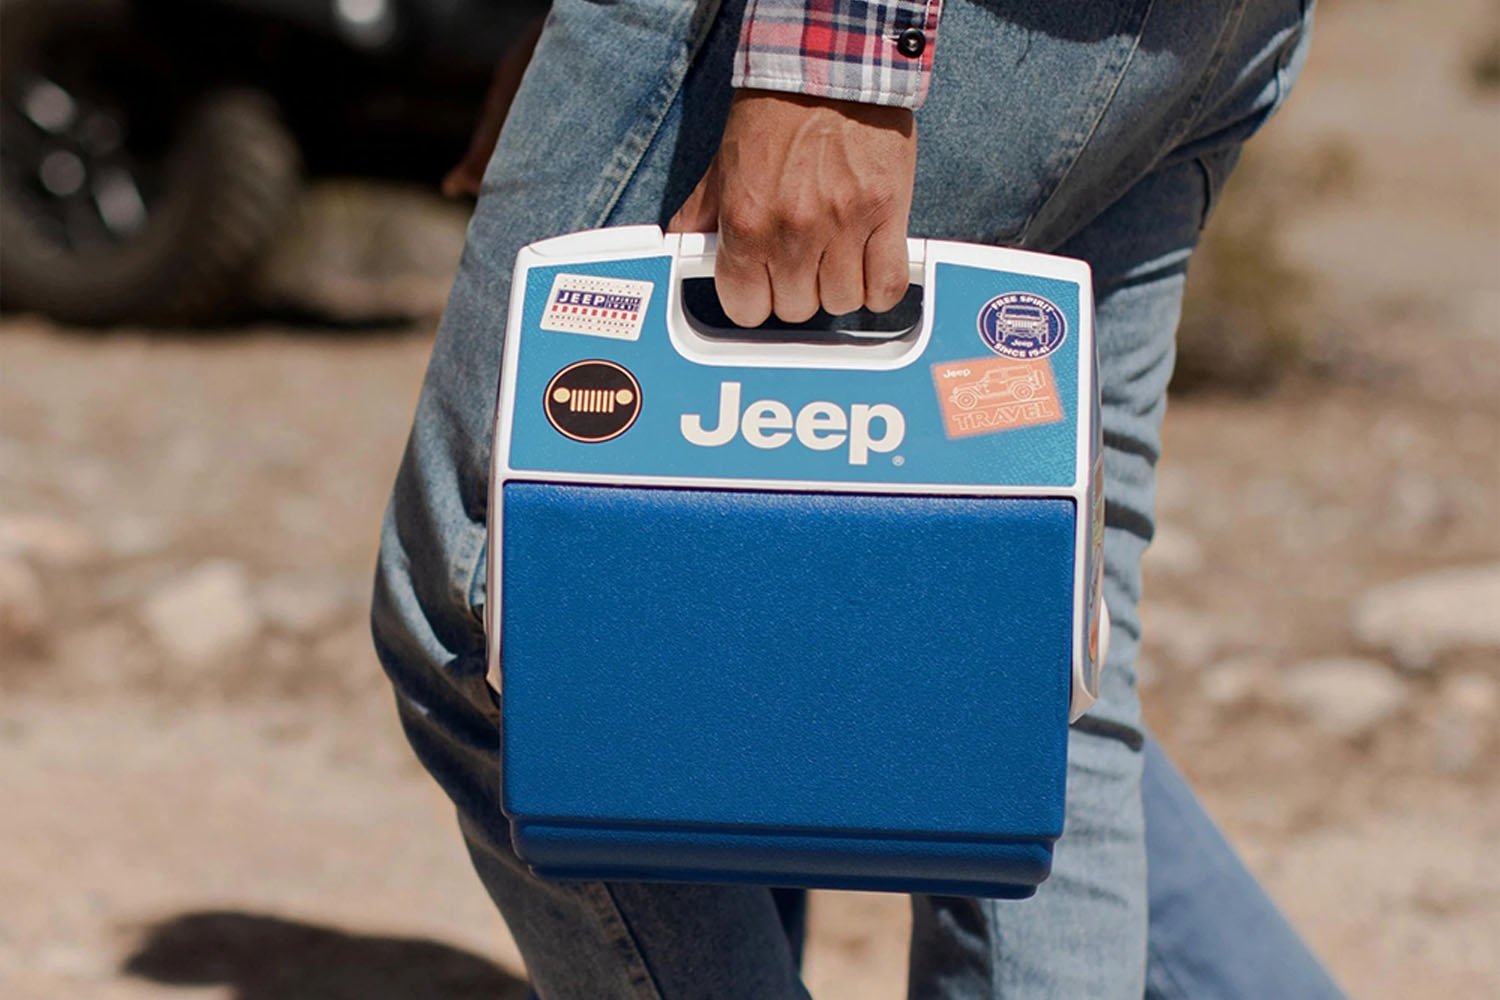 a Igloo cooler with Jeep branding being held by a model